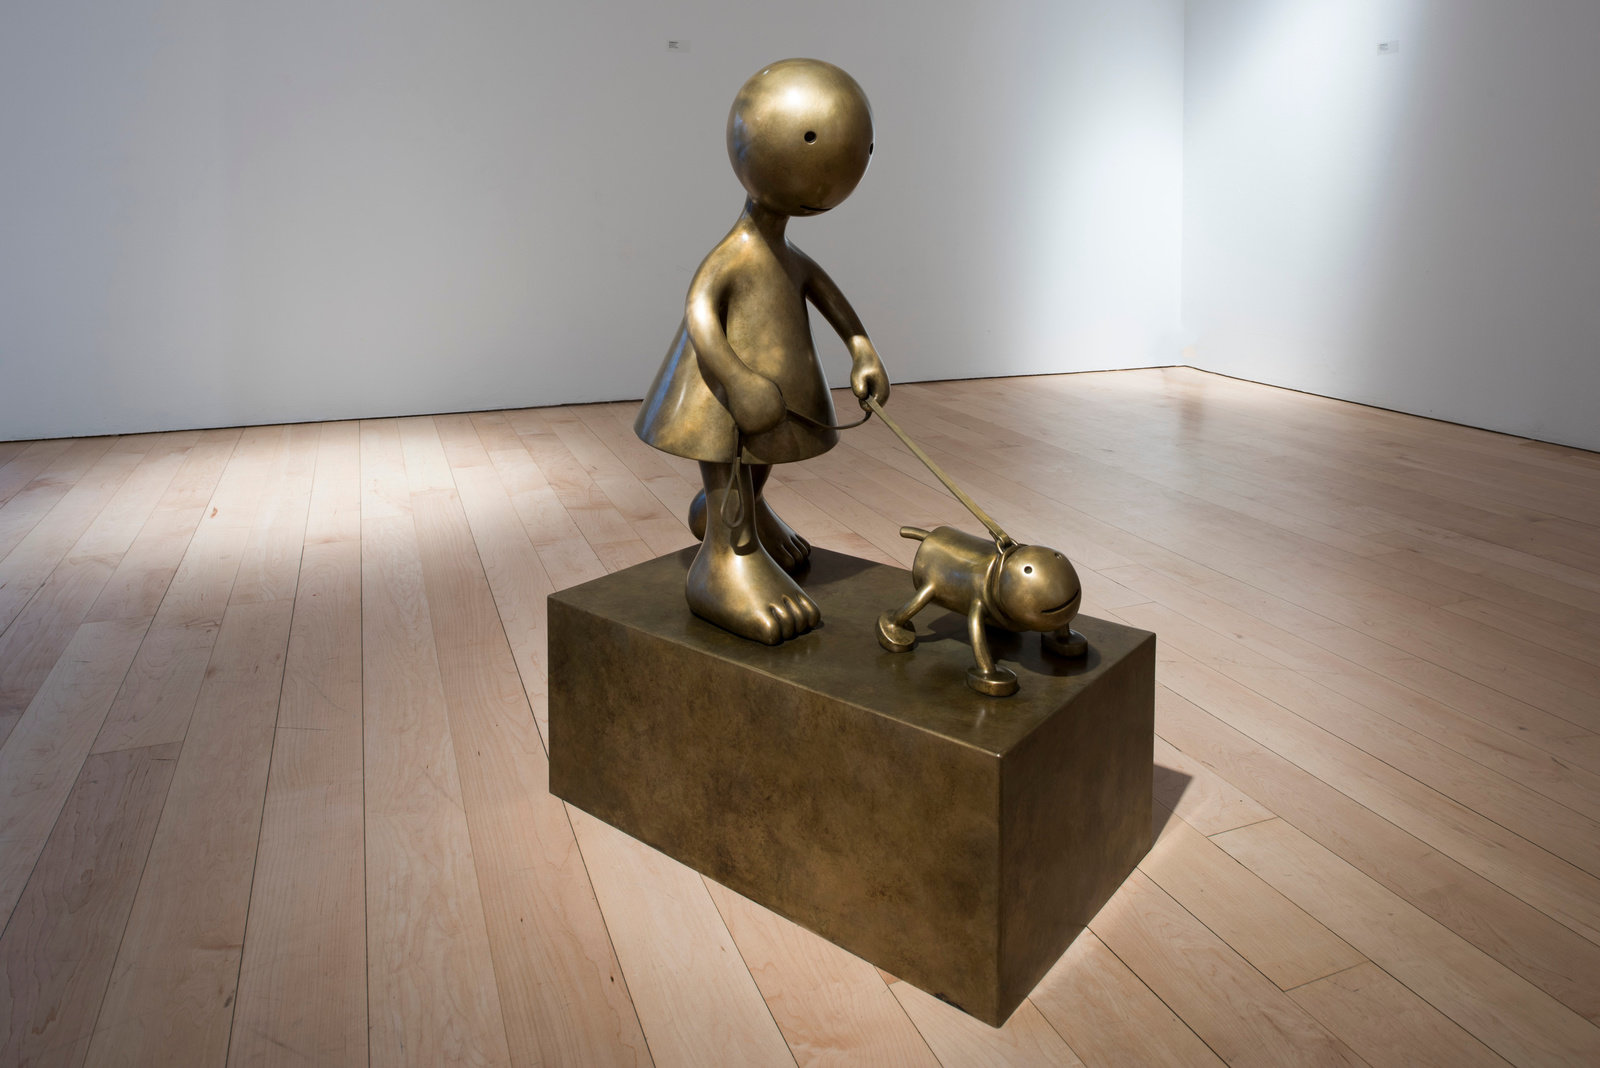 Otterness, dog walker, 2017, bronze, ed. 2 of 6, 40 1 2 x 28 x 16 in., non 59.473